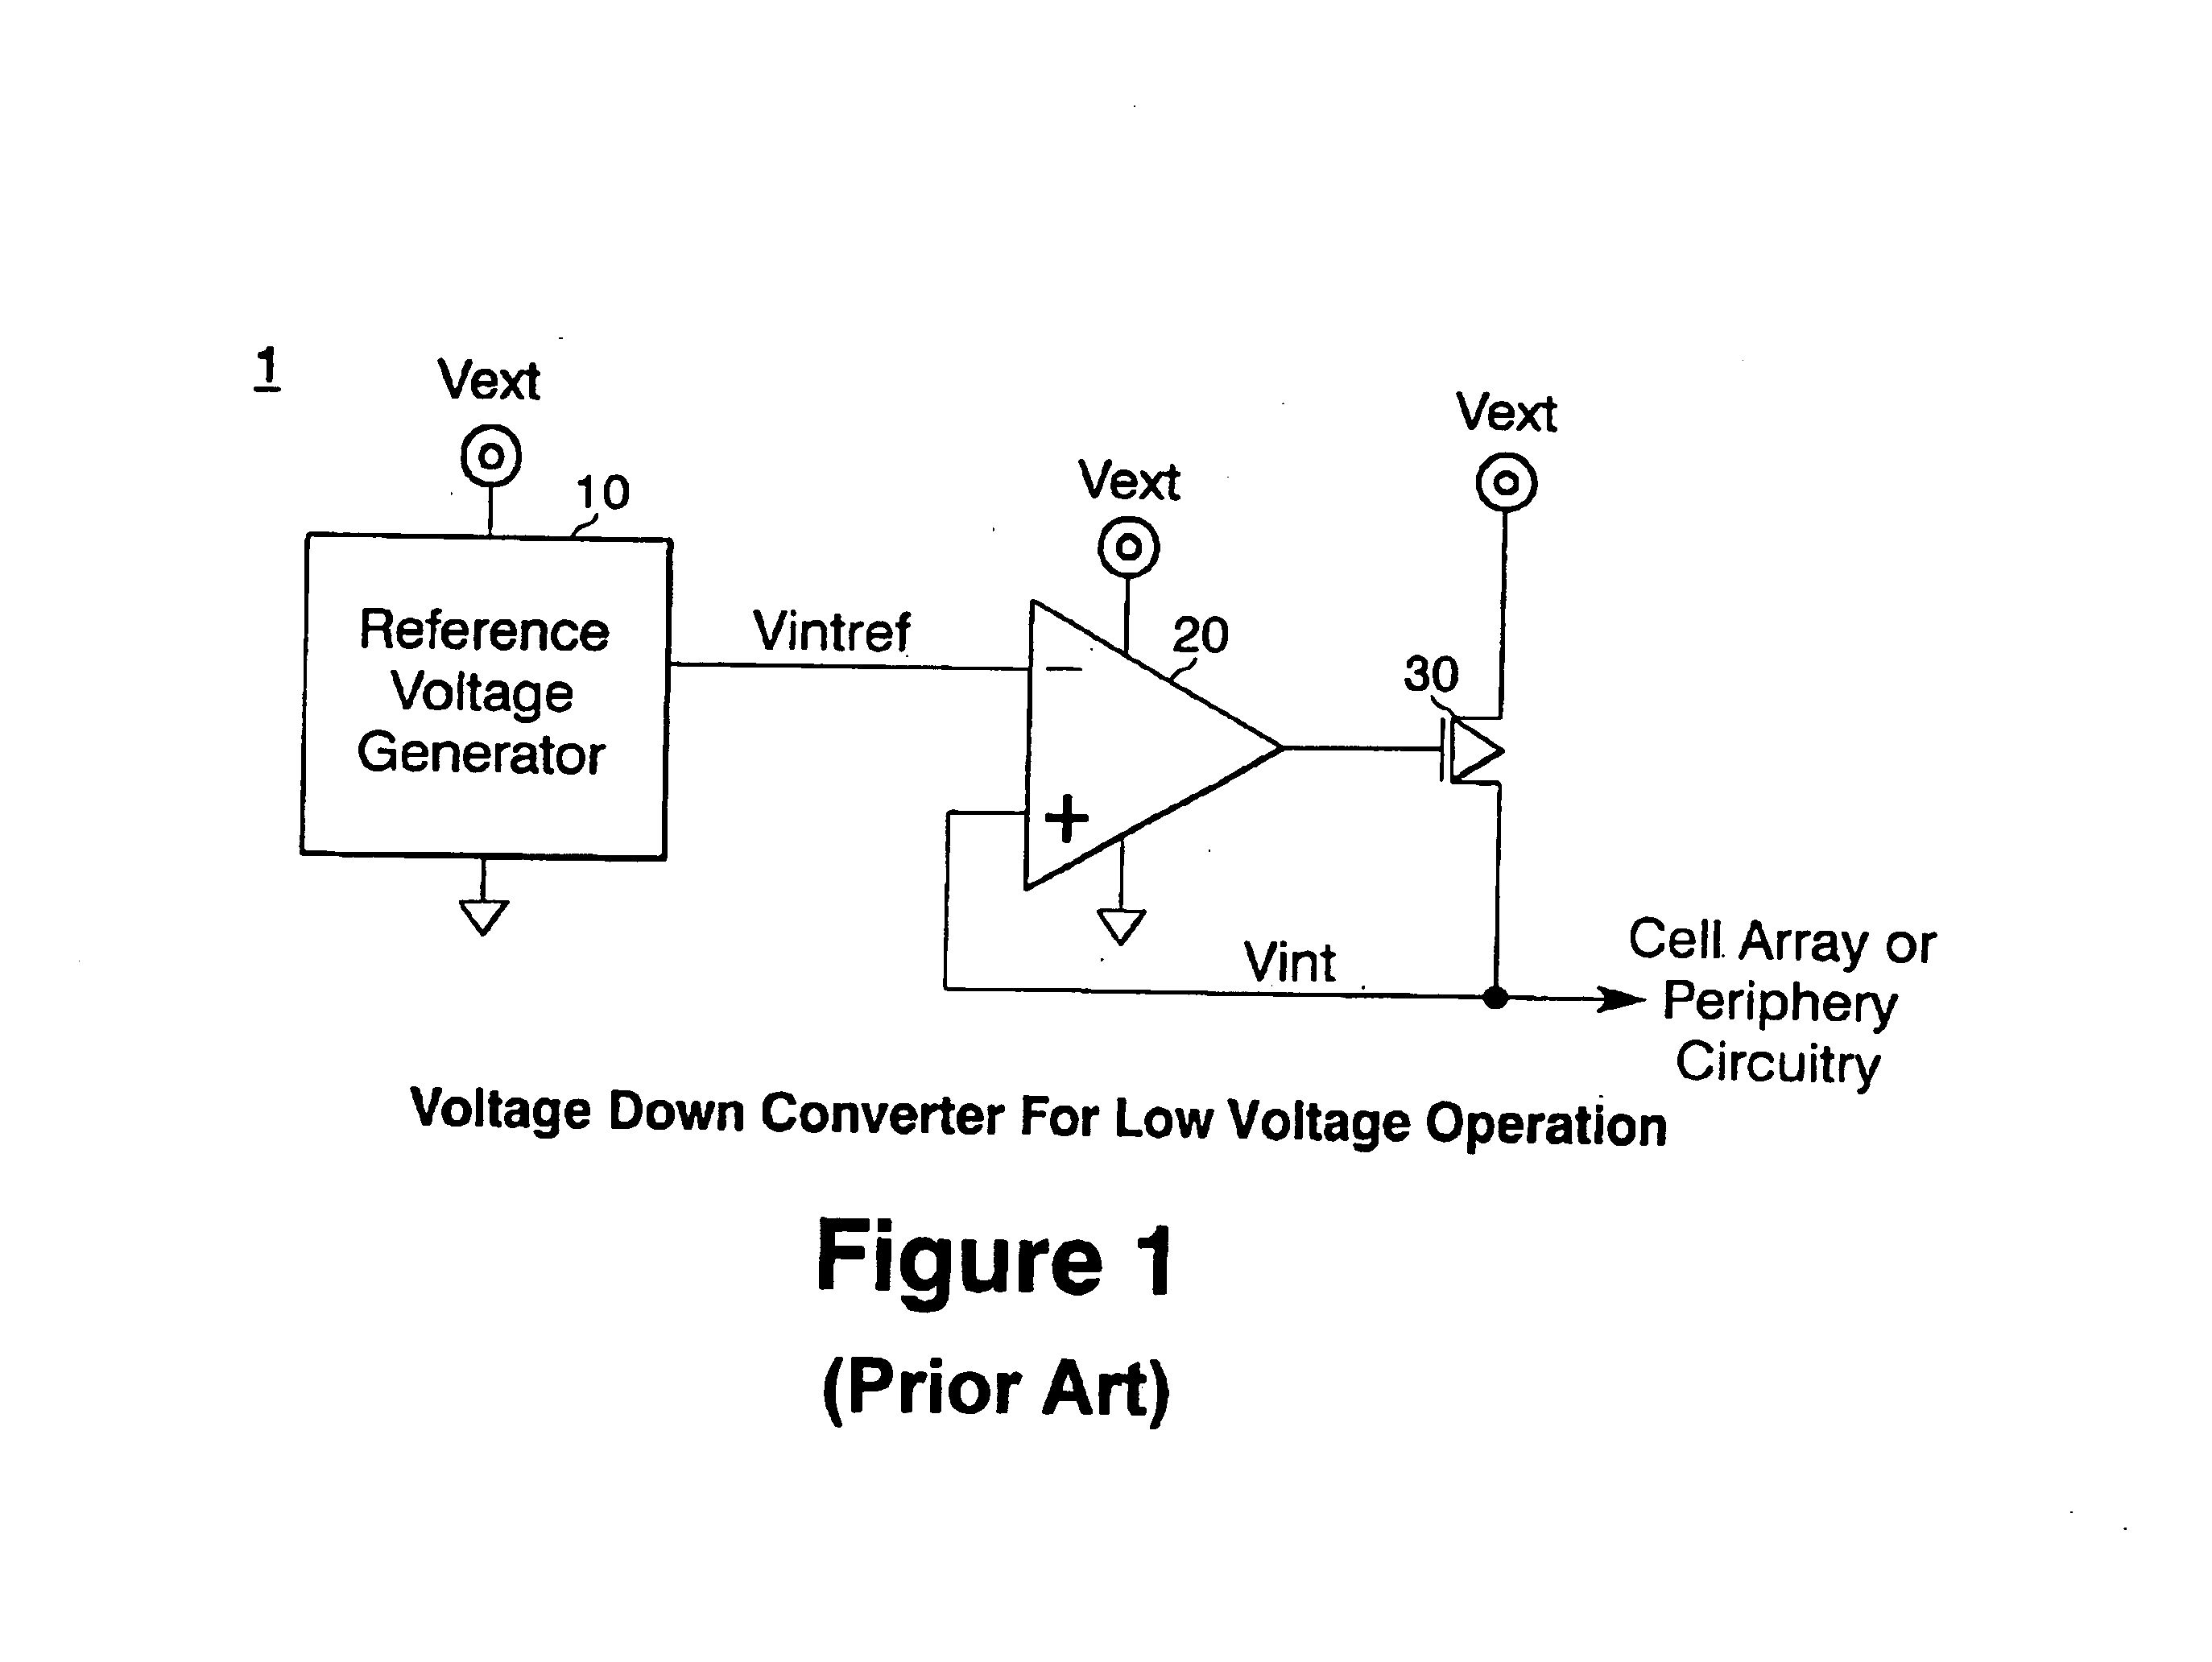 Voltage down converter for low voltage operation